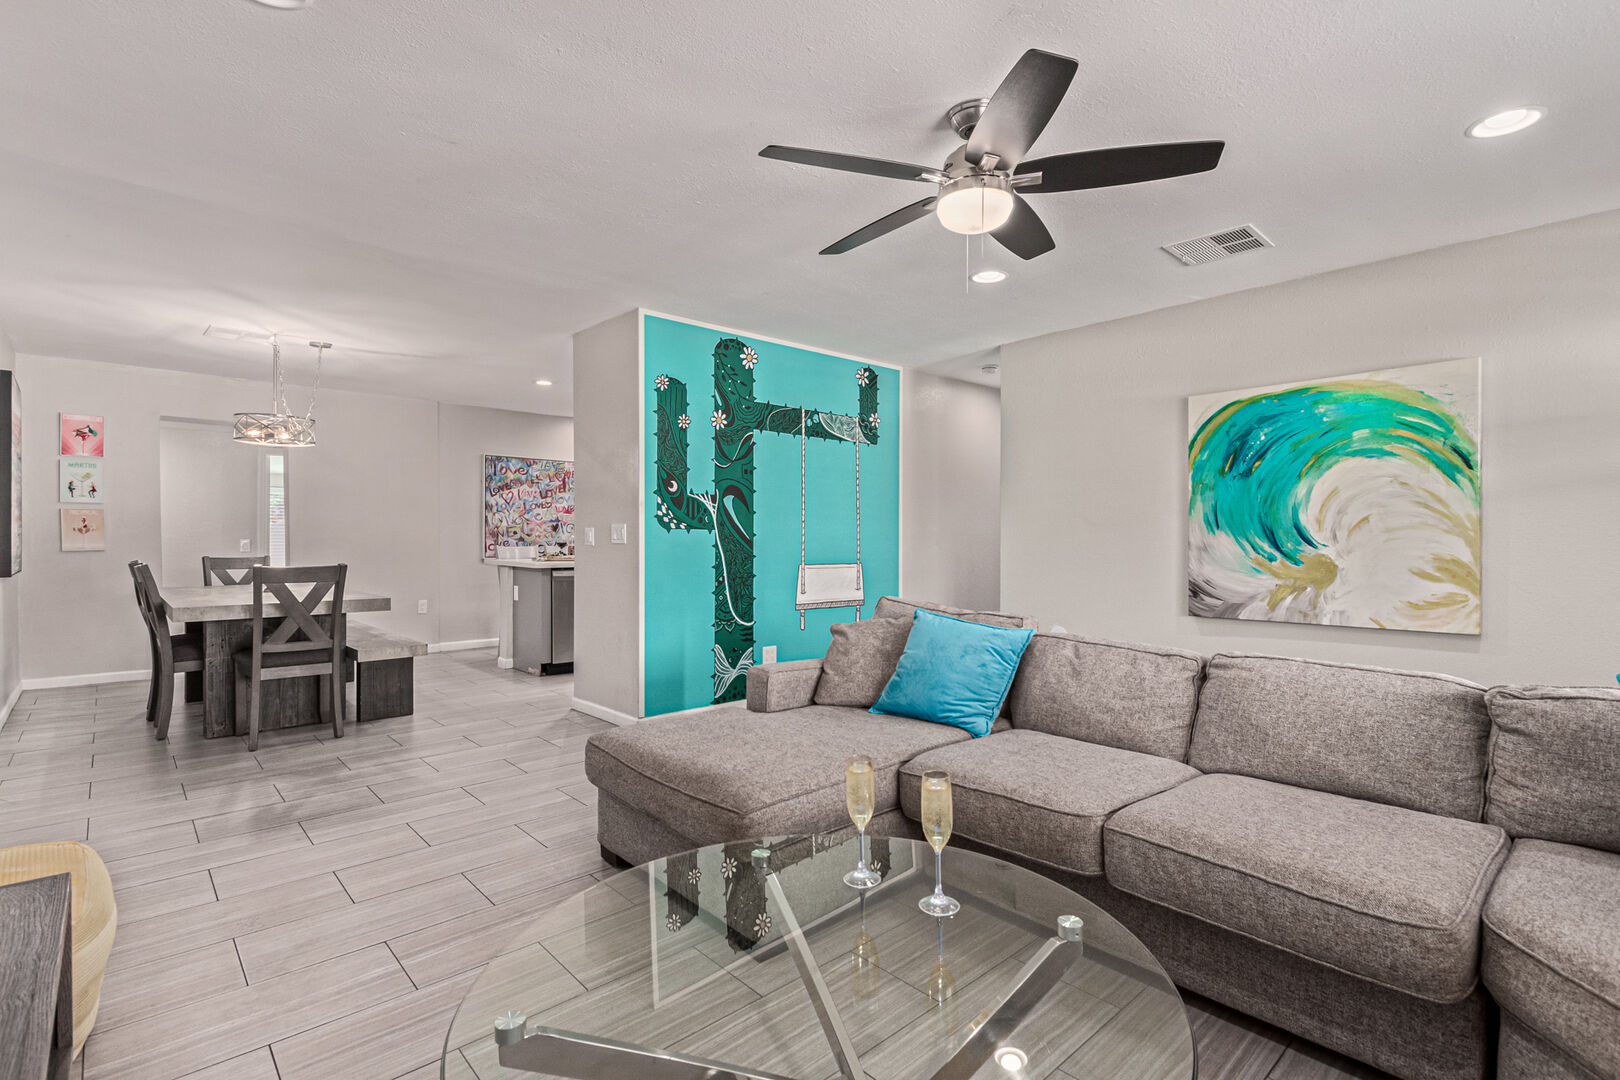 Bright Living Space featuring new mural, SMART flat-screen TV, and Designer Furnishings.